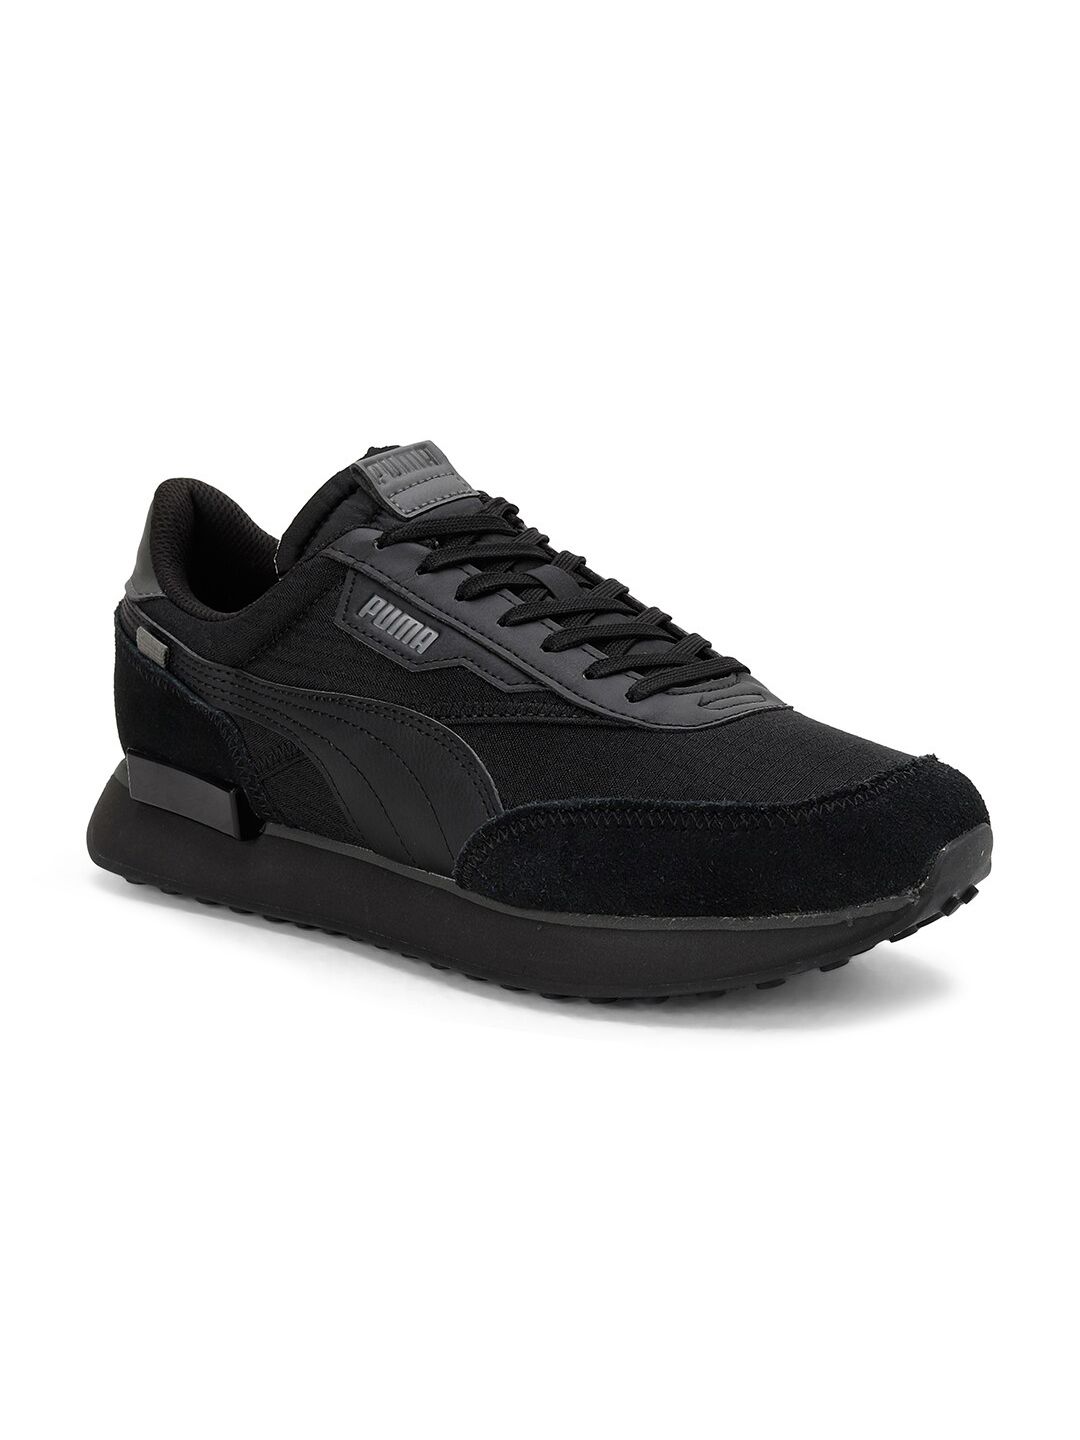 Puma Black Future Rider Play On Sneakers Price in India